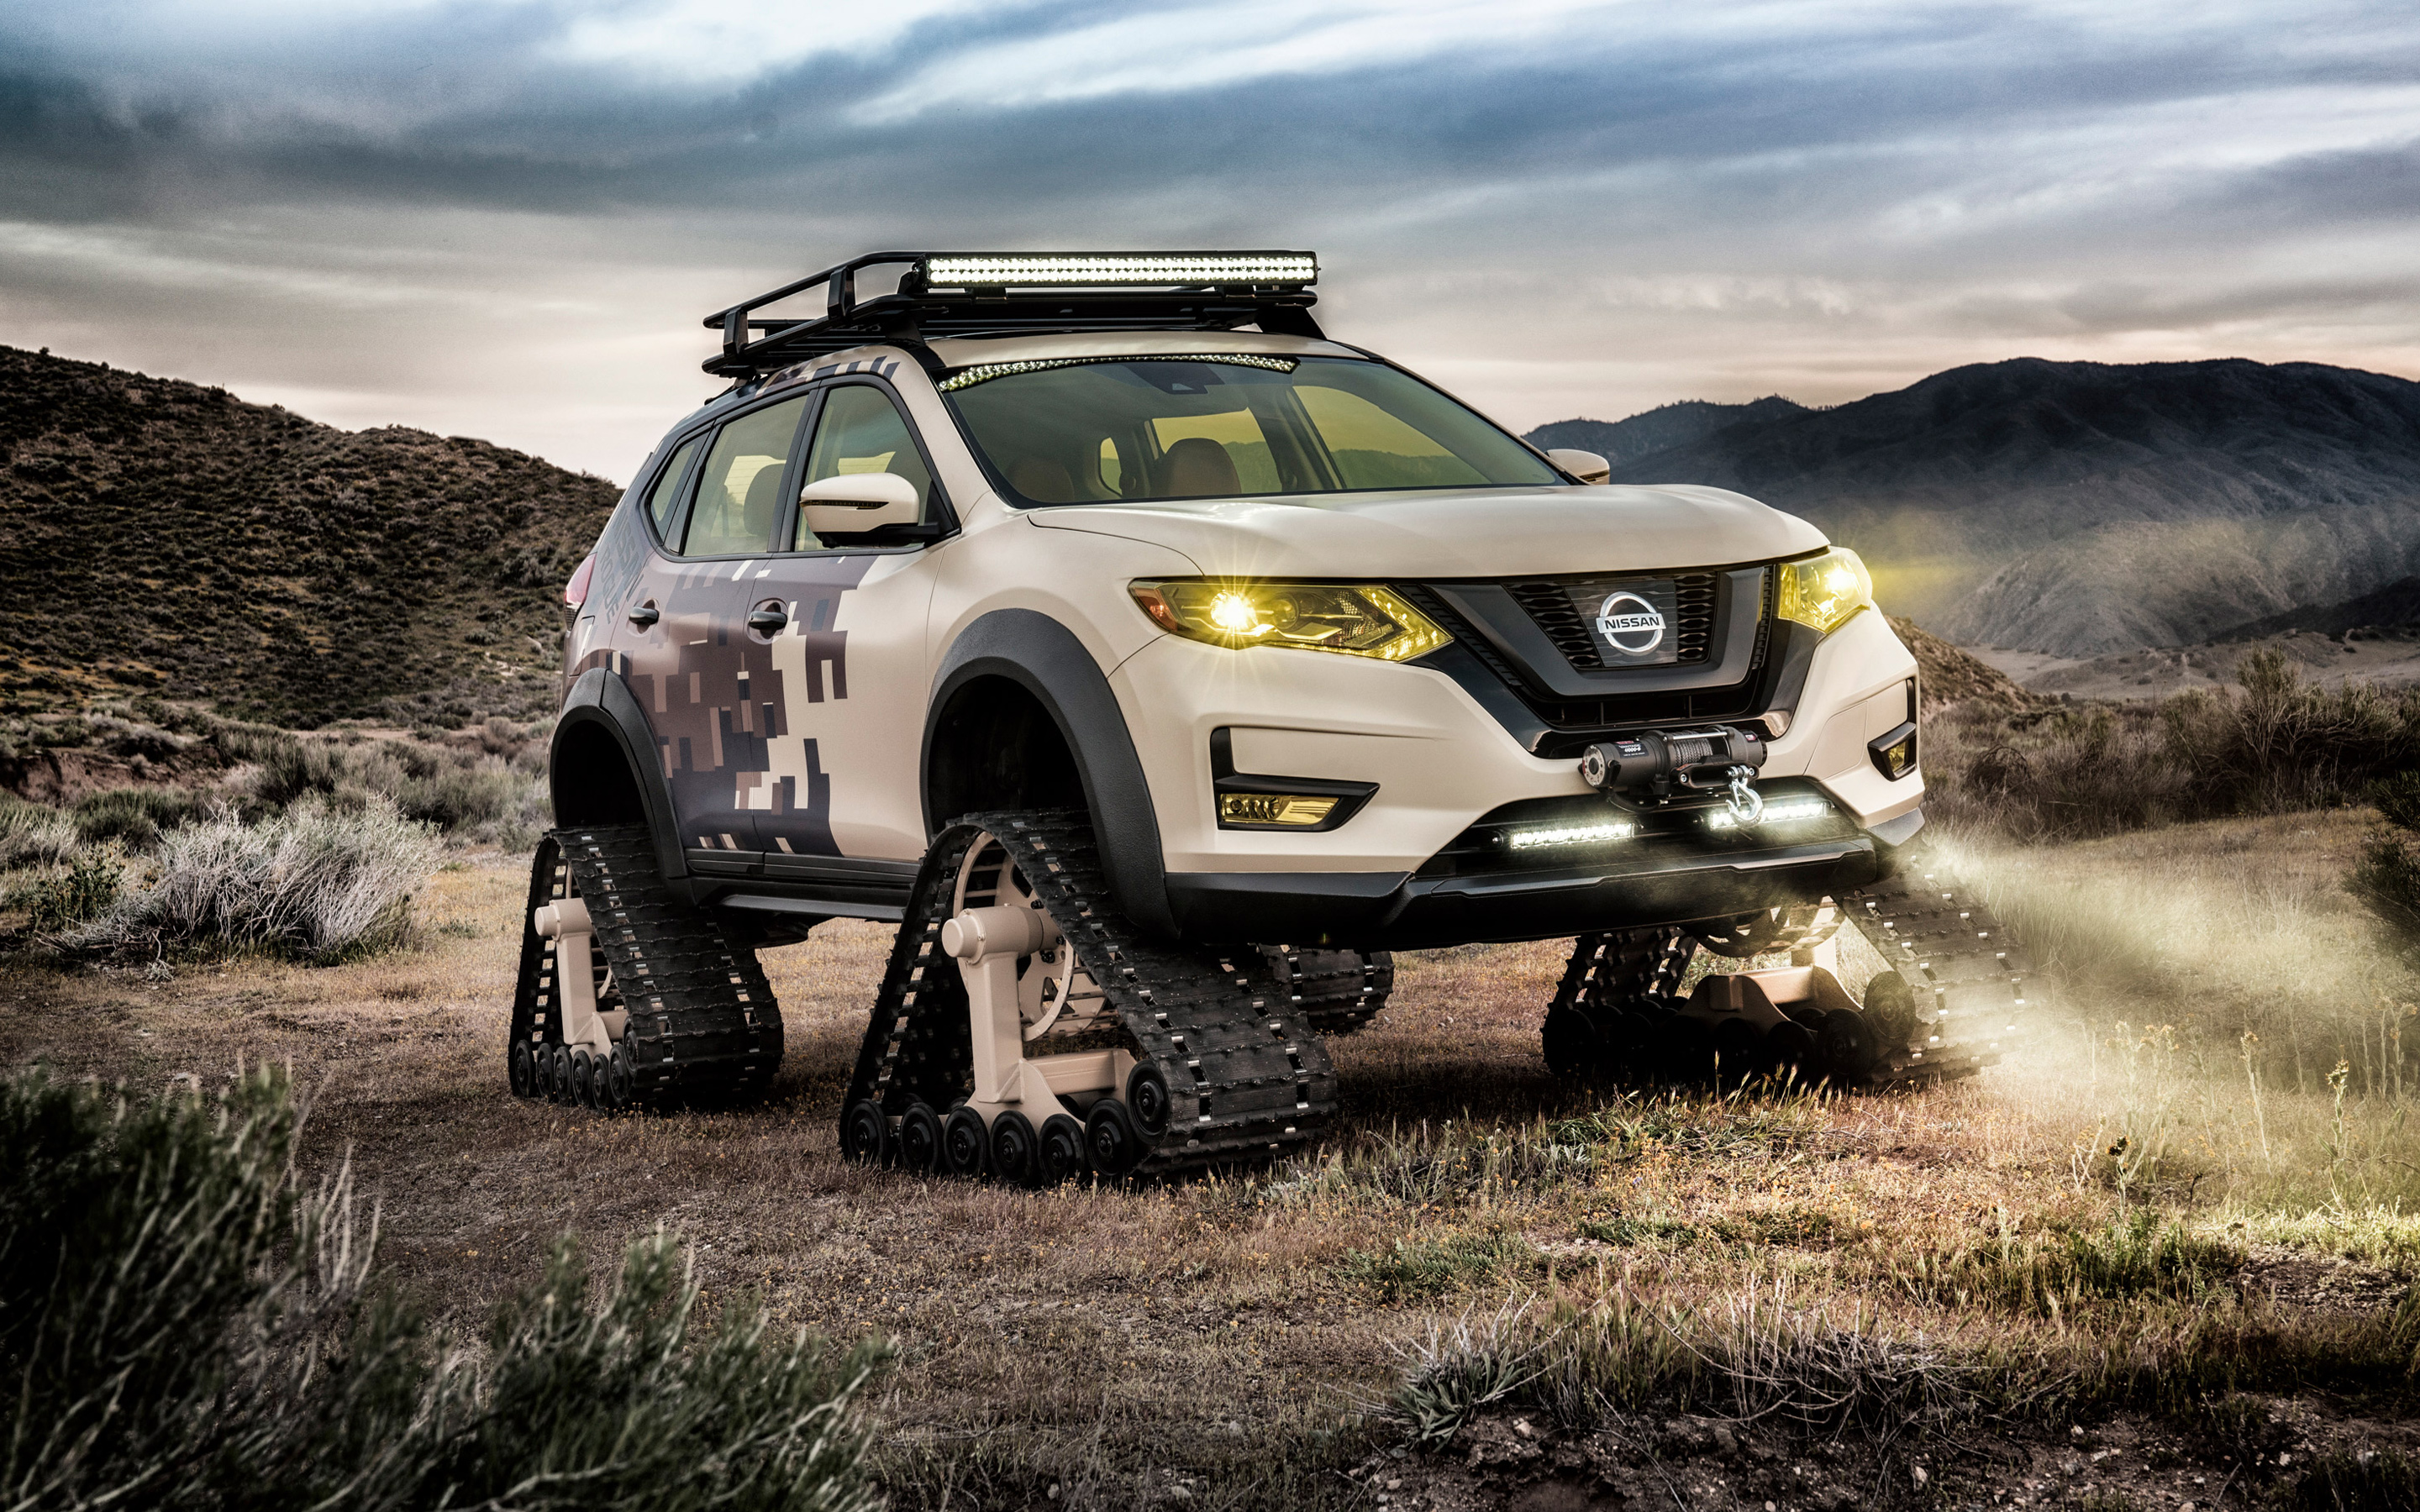 Nissan Rogue Trail Warrior Project Concept 2017362419962 - Nissan Rogue Trail Warrior Project Concept 2017 - Warrior, Trail, Rogue, Project, Nissan, Concept, 2027, 2017